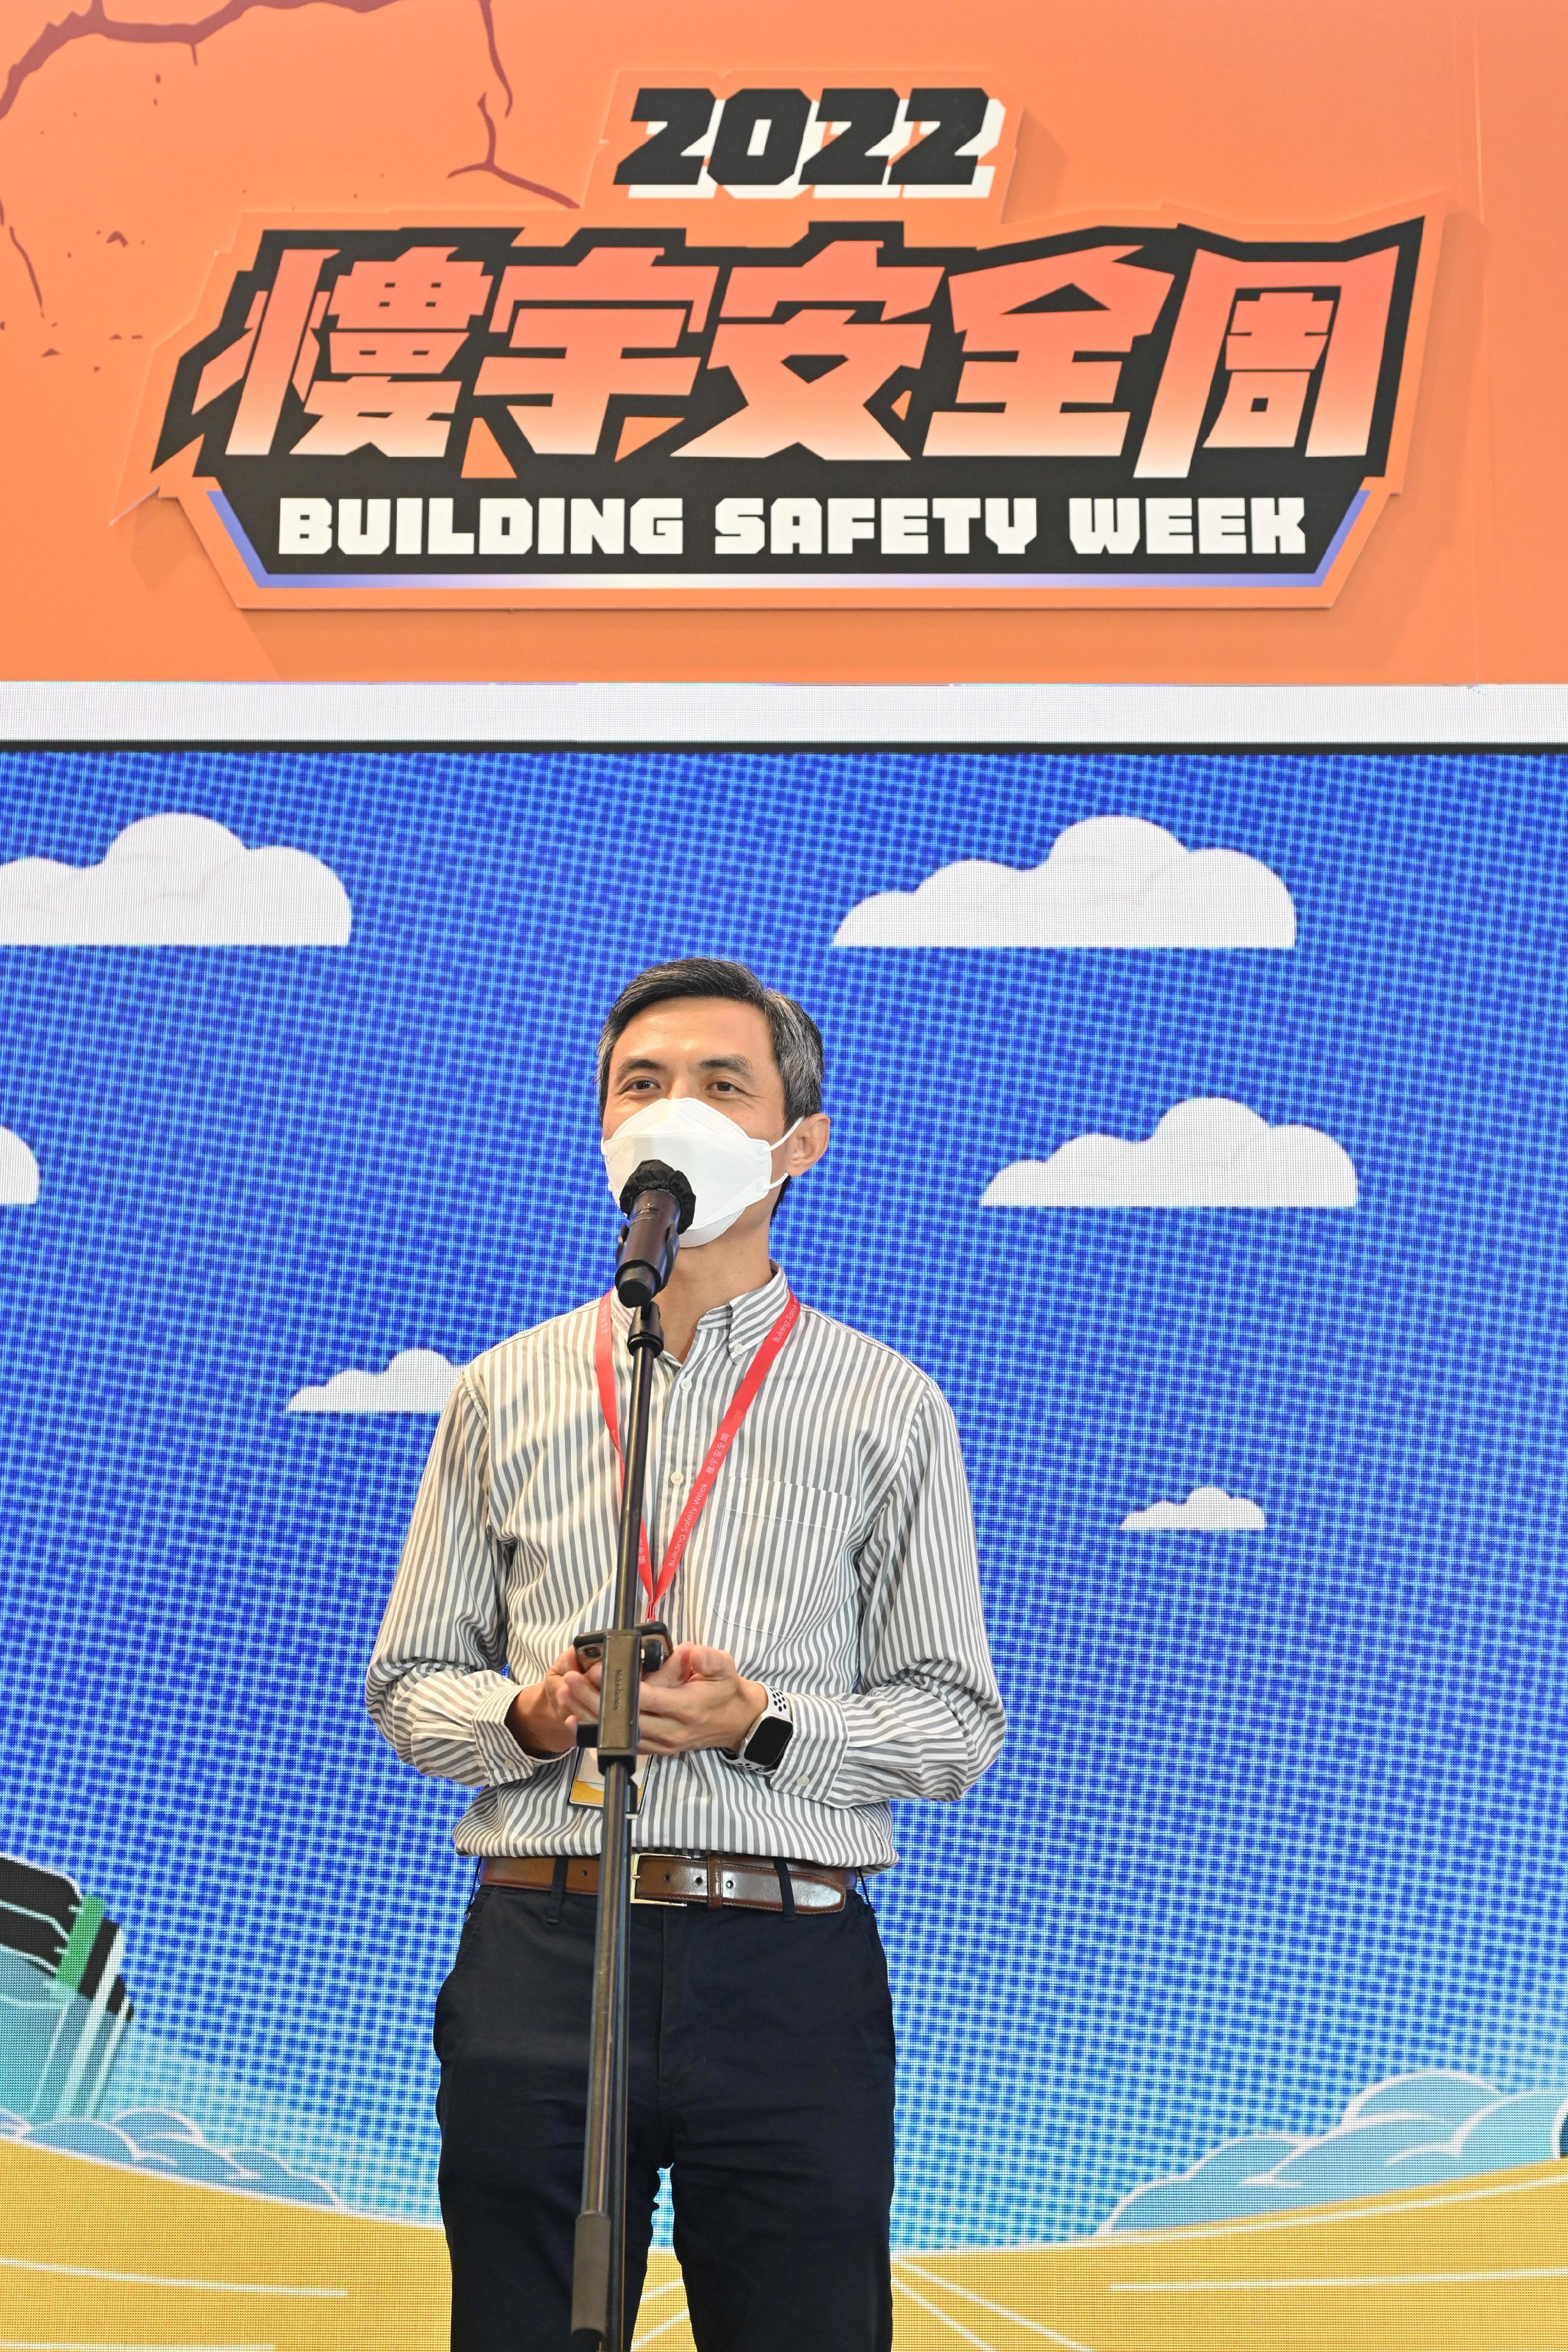 The Acting Permanent Secretary for Development (Planning and Lands), Mr Vic Yau, speaks at the opening ceremony of Building Safety Week 2022 held by the Buildings Department today (October 22).